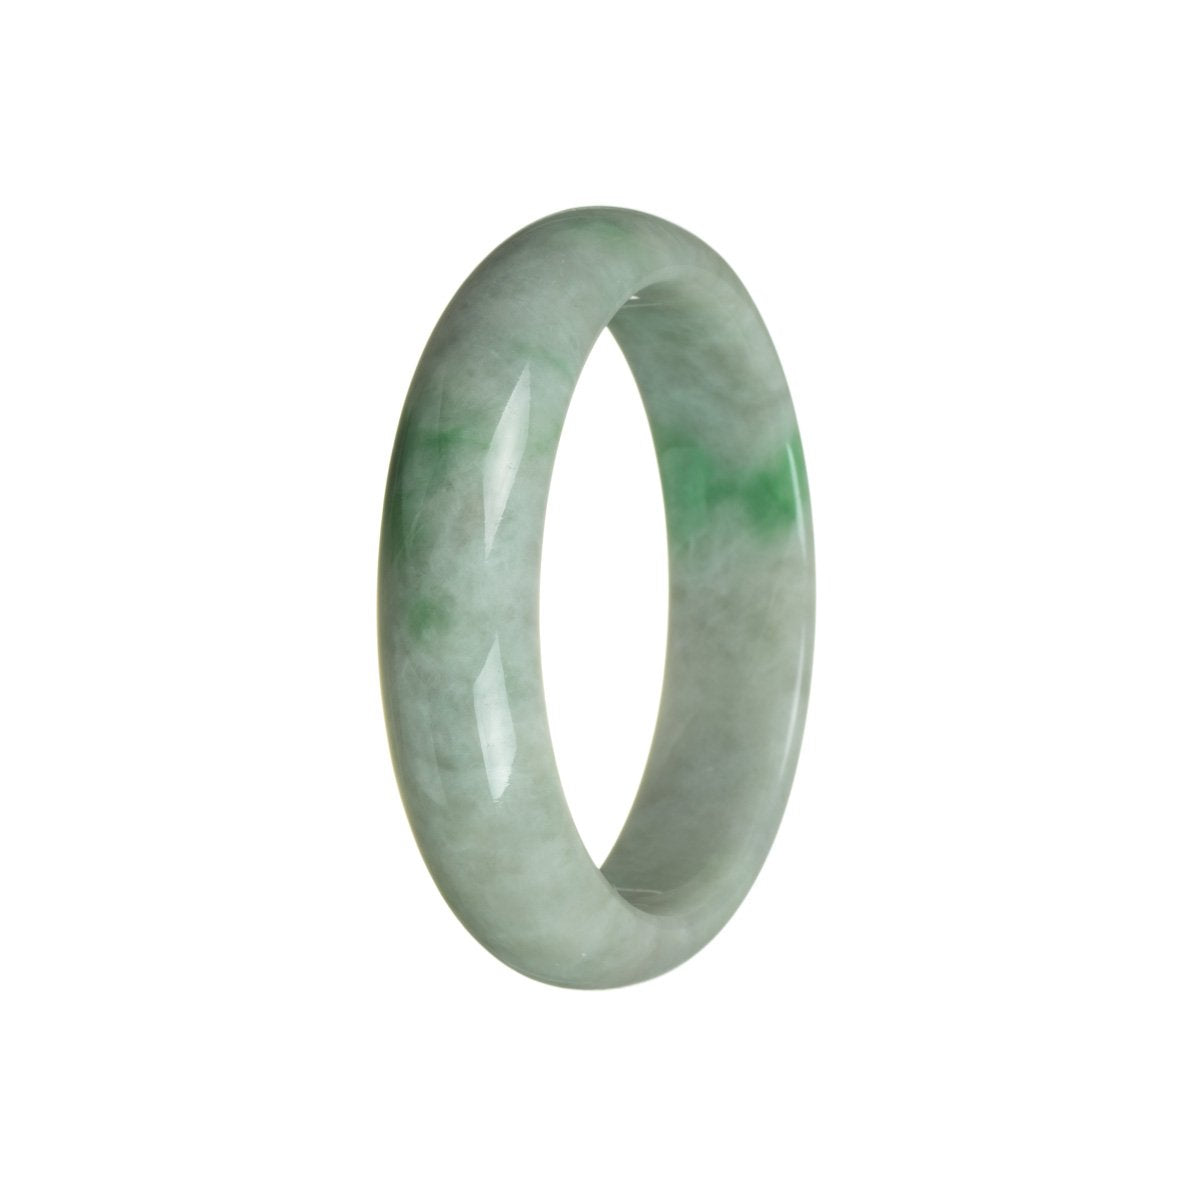 A light gray bangle bracelet made with real grade A green jade, featuring a 58mm half moon design.